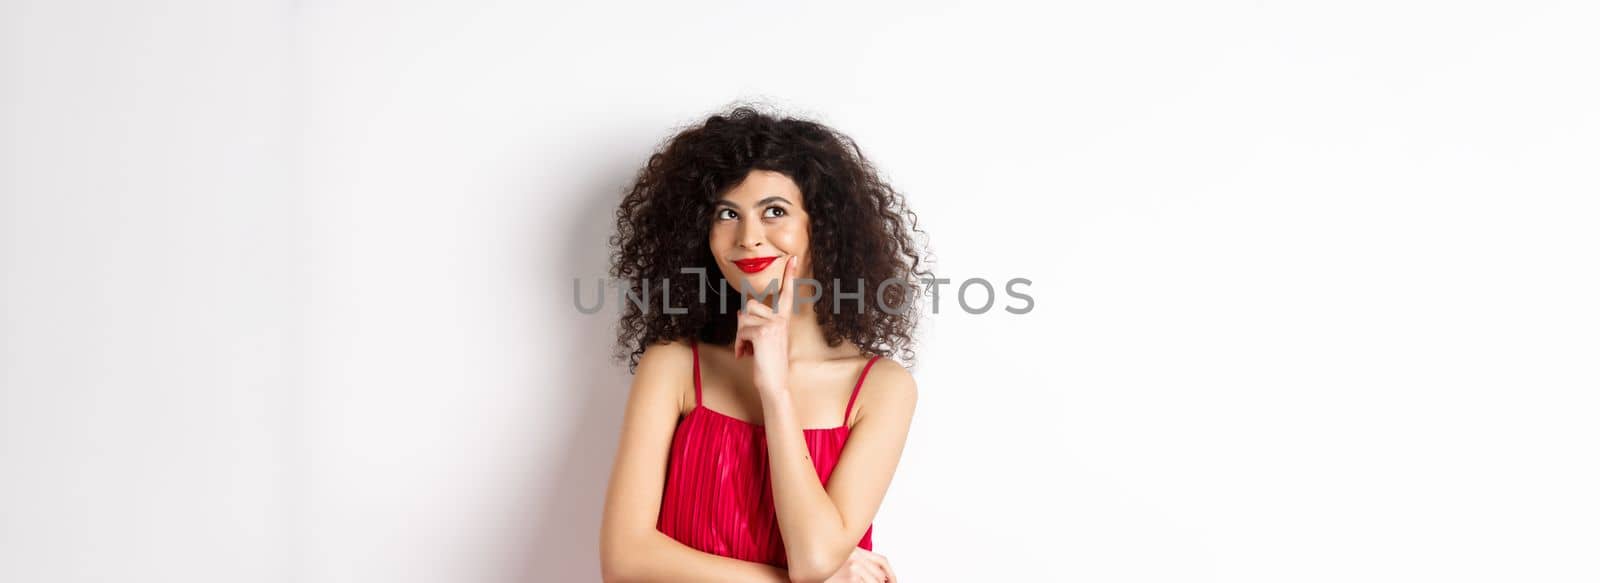 Image of elegant woman in red dress, looking pensive and smiling, thinking of romantic date, standing over white background.